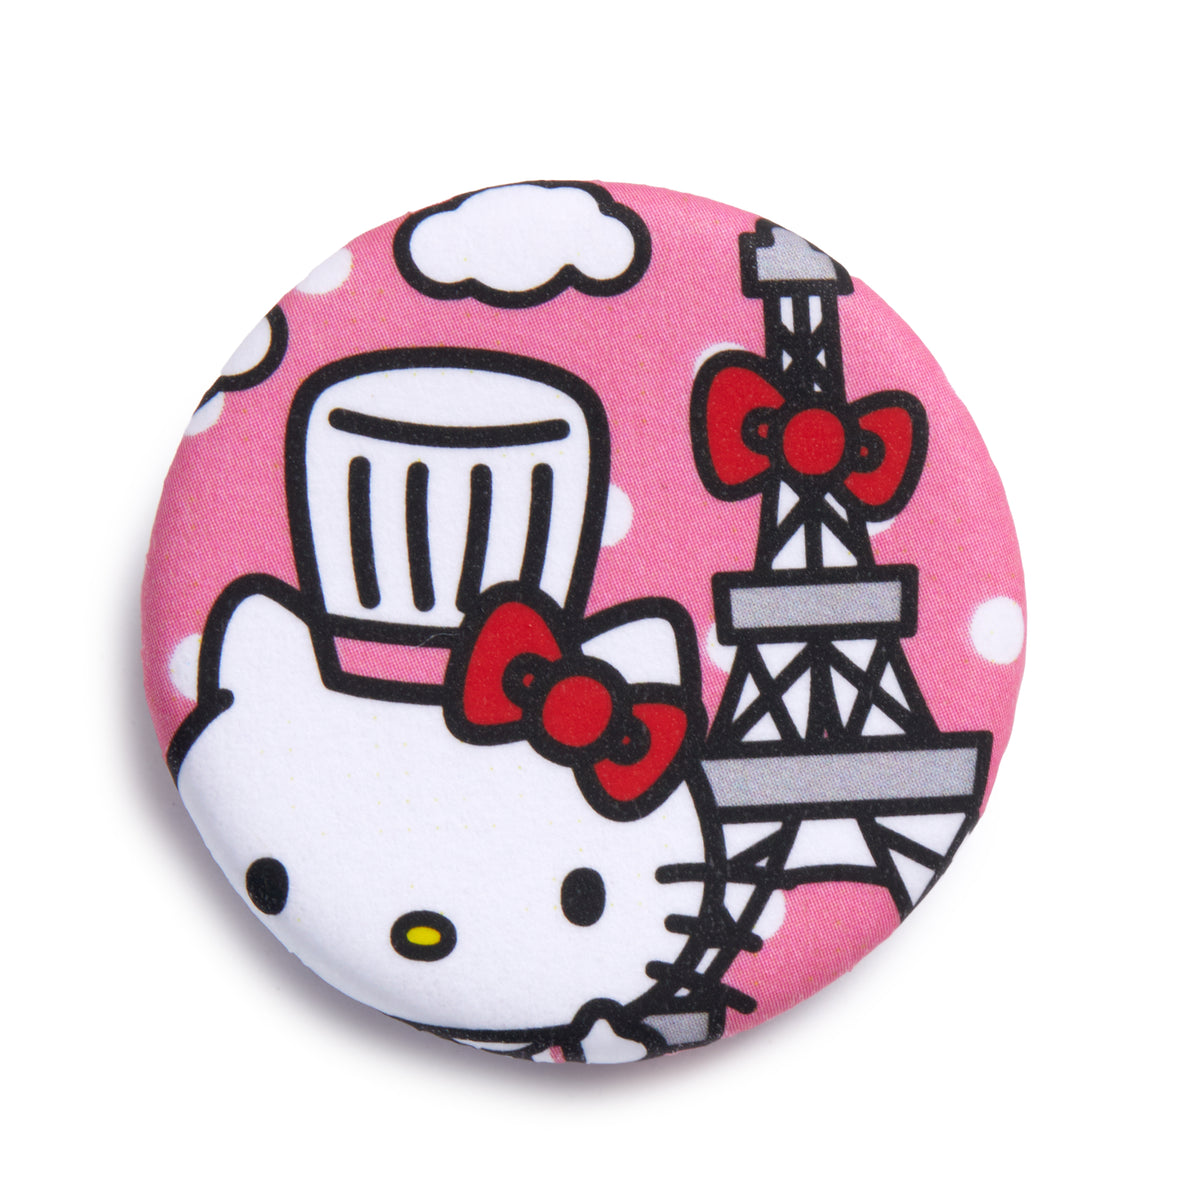 Hello Kitty and Friends are back featuring vintage-inspired